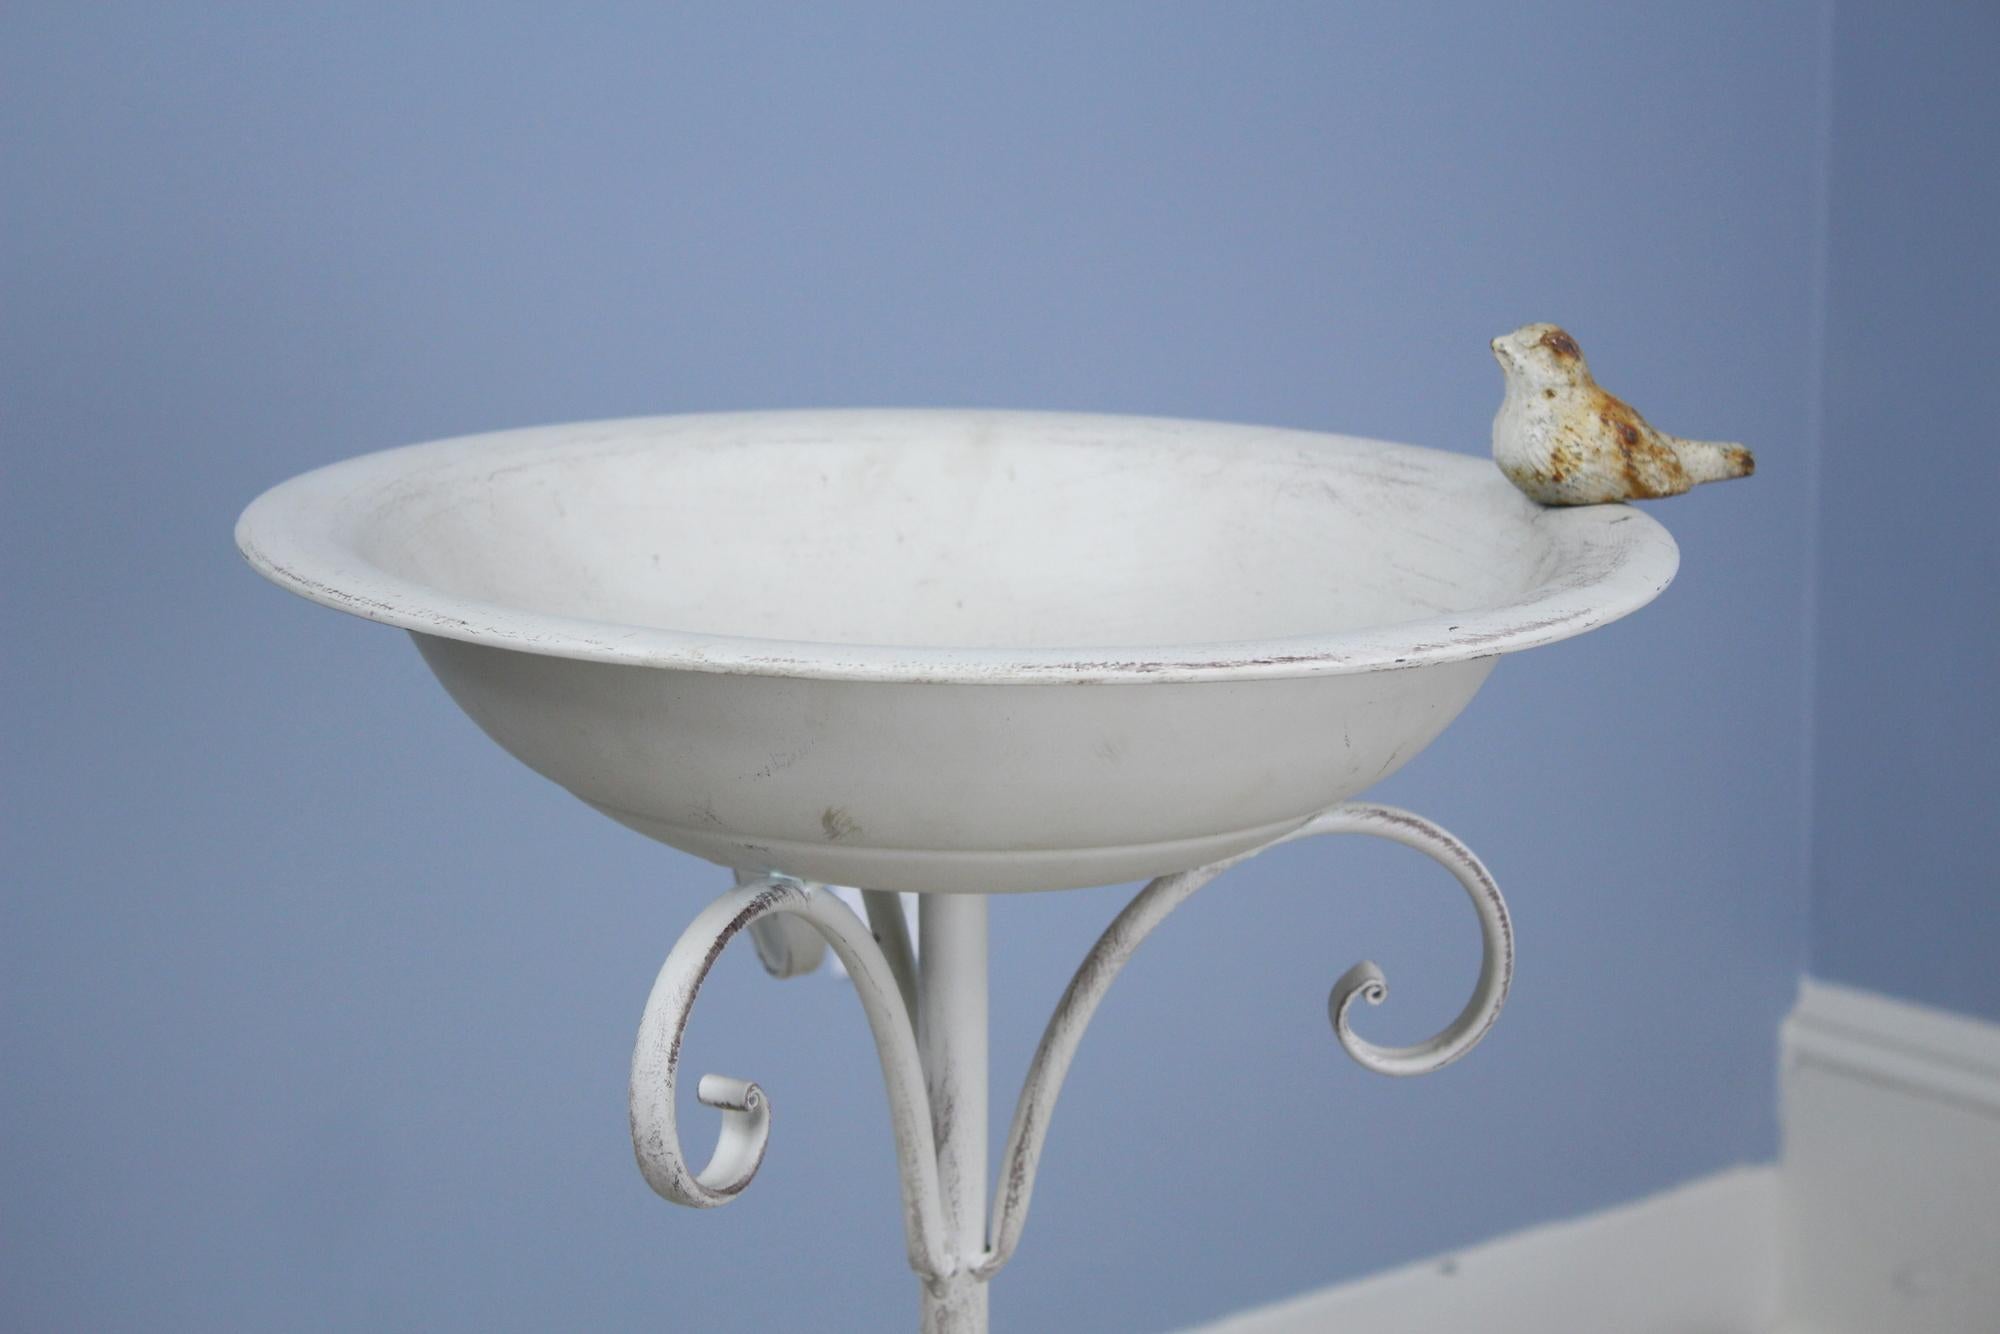 A delicate metal bird bath, restored paint and faux distressed. The small bird feature on the side, with fully articulated face and feathers, fills this piece with charm!